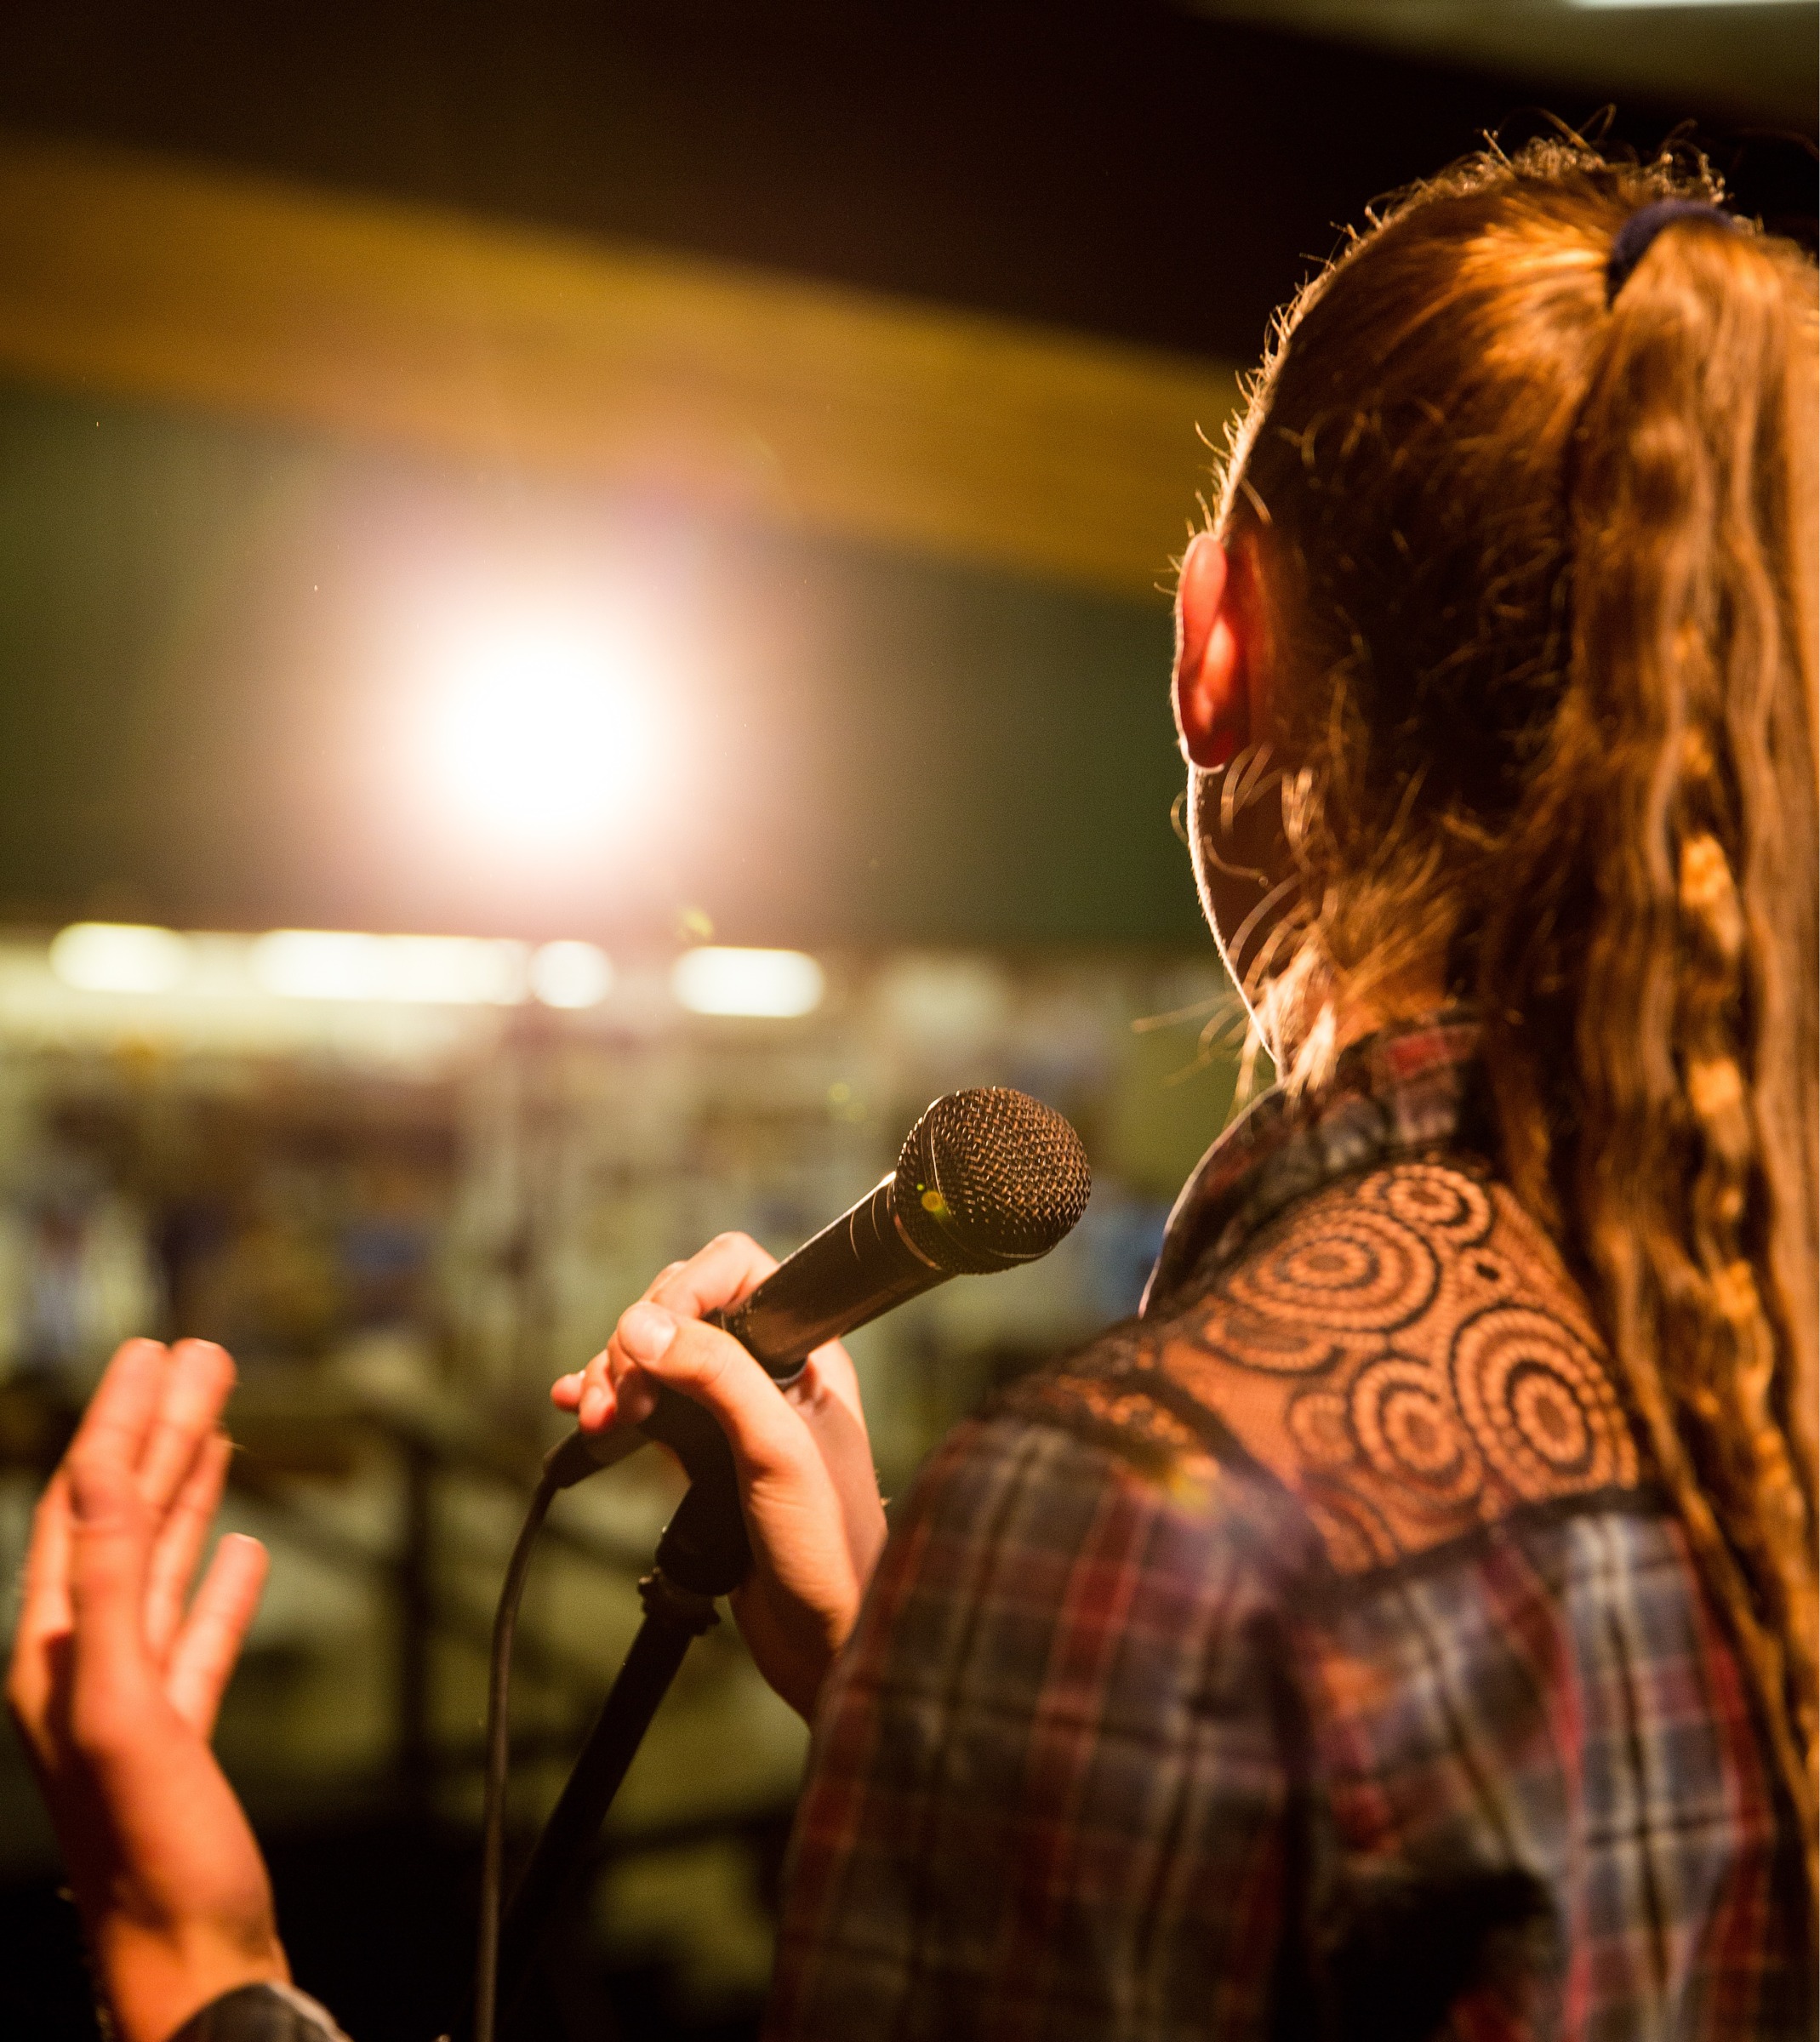 A young person with wavy, light brown hair in a ponytail has their back to the camera. They are holding a microphone.